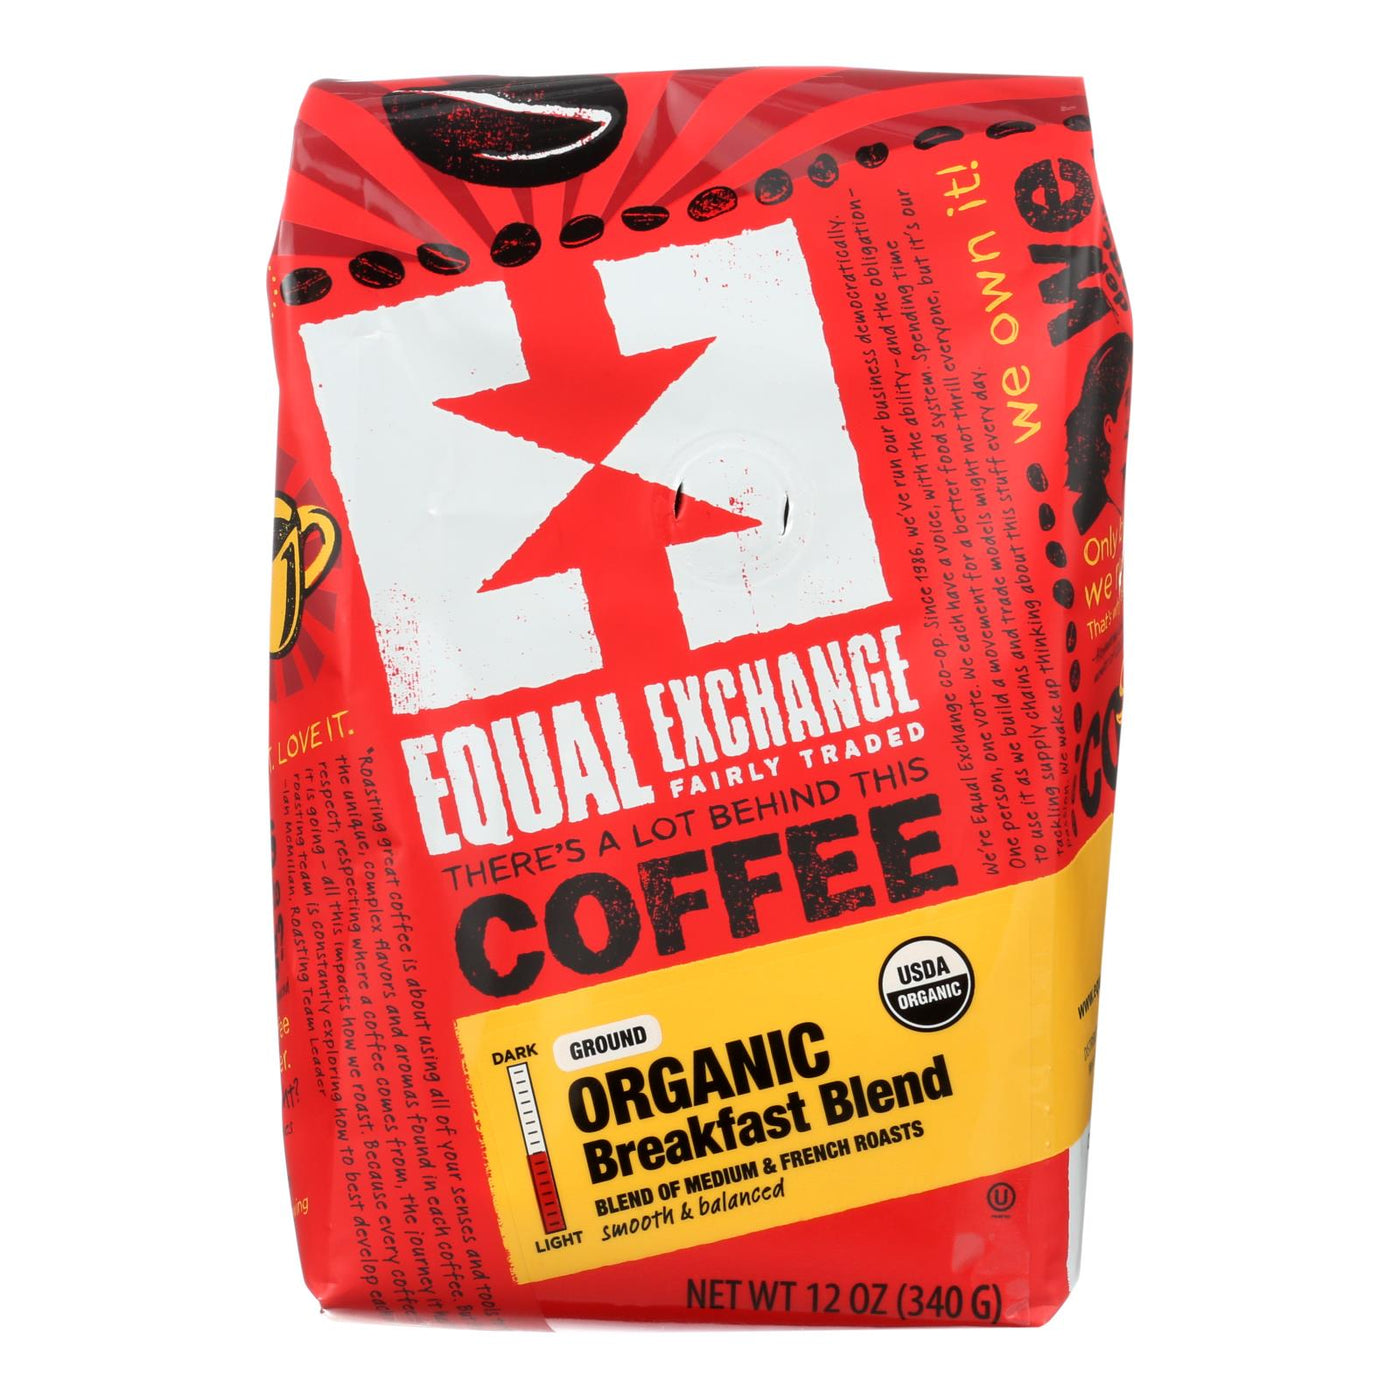 Equal Exchange Organic Drip Coffee - Breakfast Blend - Case Of 6 - 12 Oz. | OnlyNaturals.us